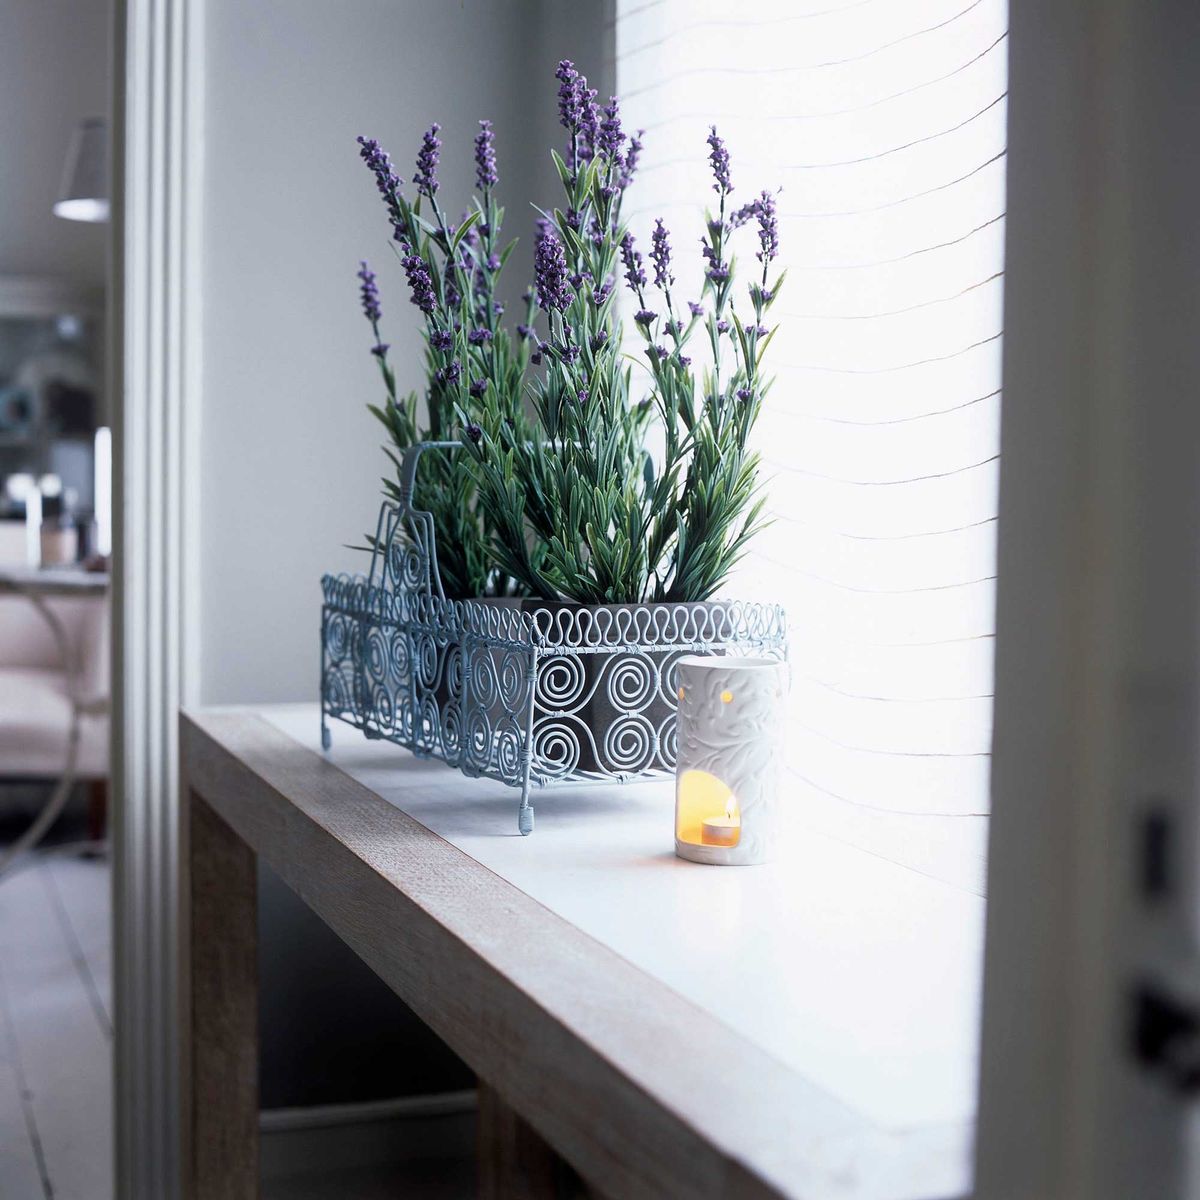 Can I grow lavender indoors? Expert tips for healthy plants